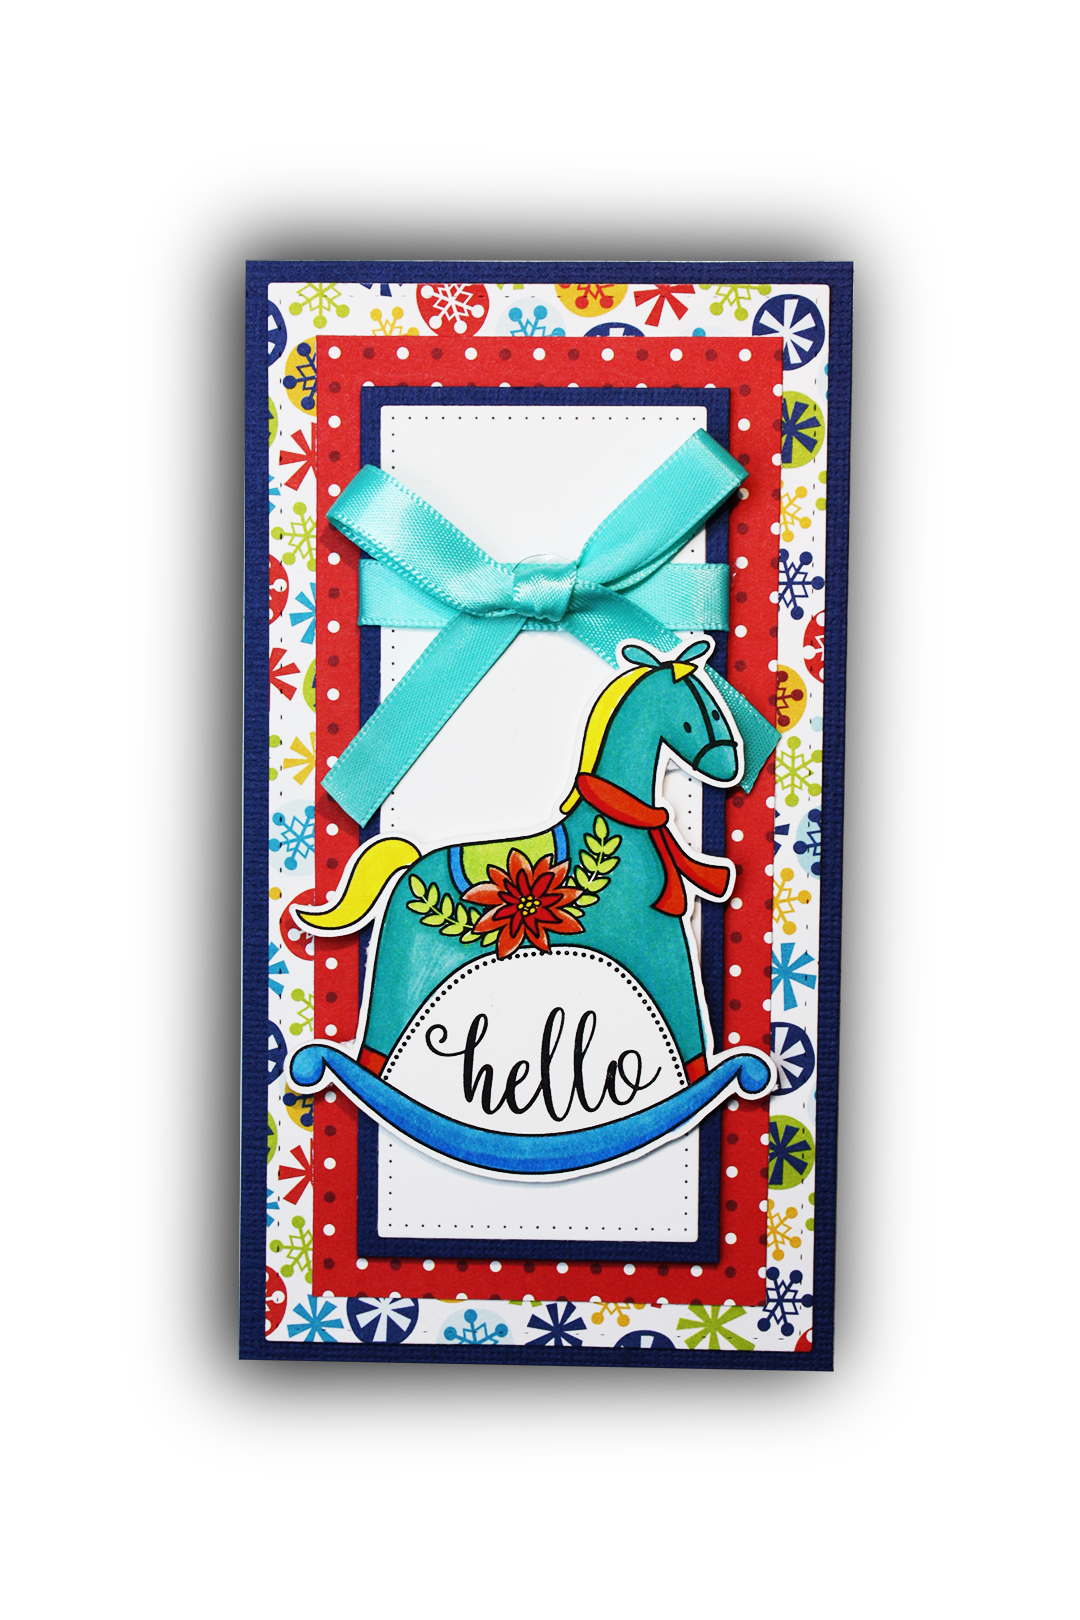 Handmade card using the stamp set and die, "Rockin' Holiday".  Image of a rocking horse and the sentiment "hello" to send a holiday greeting card.